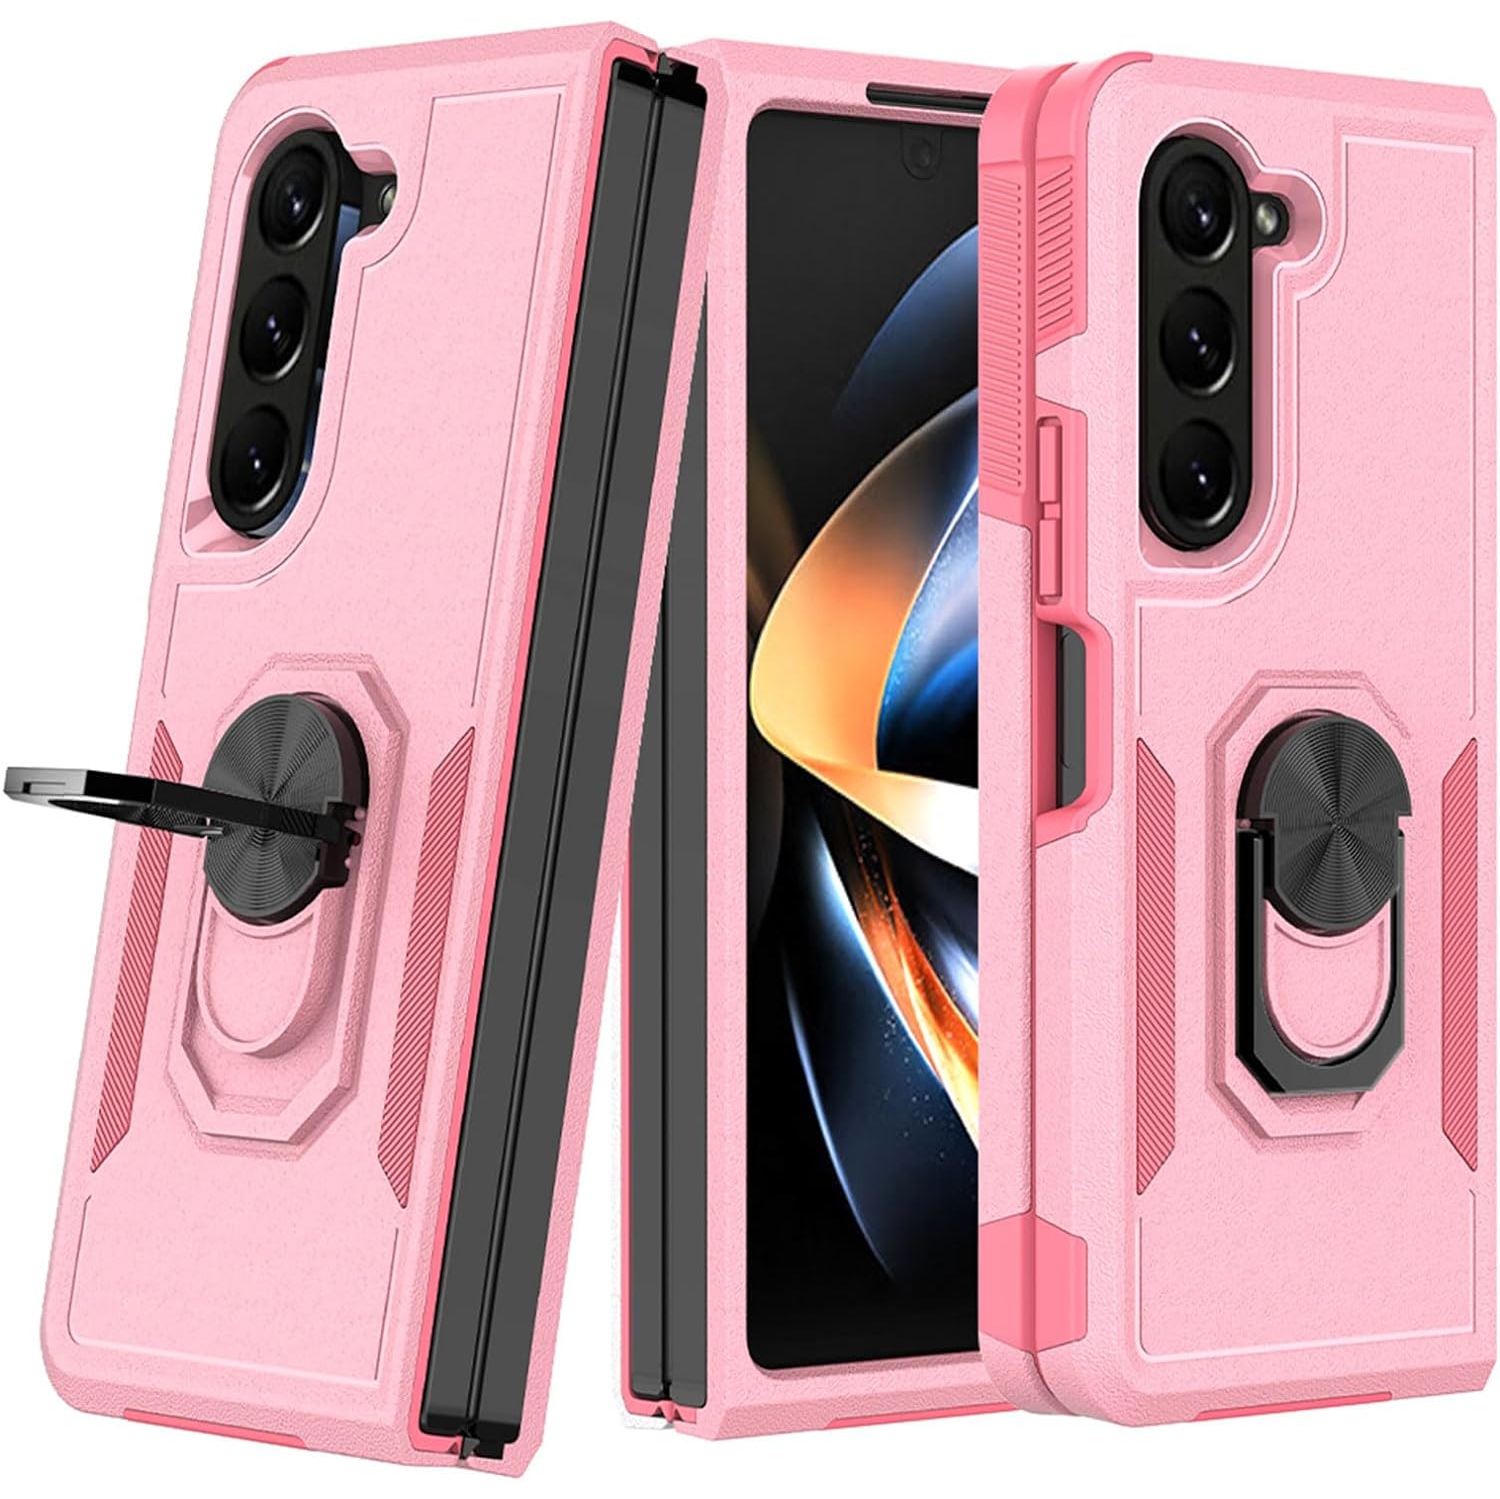 Case for Galaxy Z Fold 5, Samsung Galaxy Z Fold5 Phone case with Screen Protector, Ring Kickstand for Magnetic